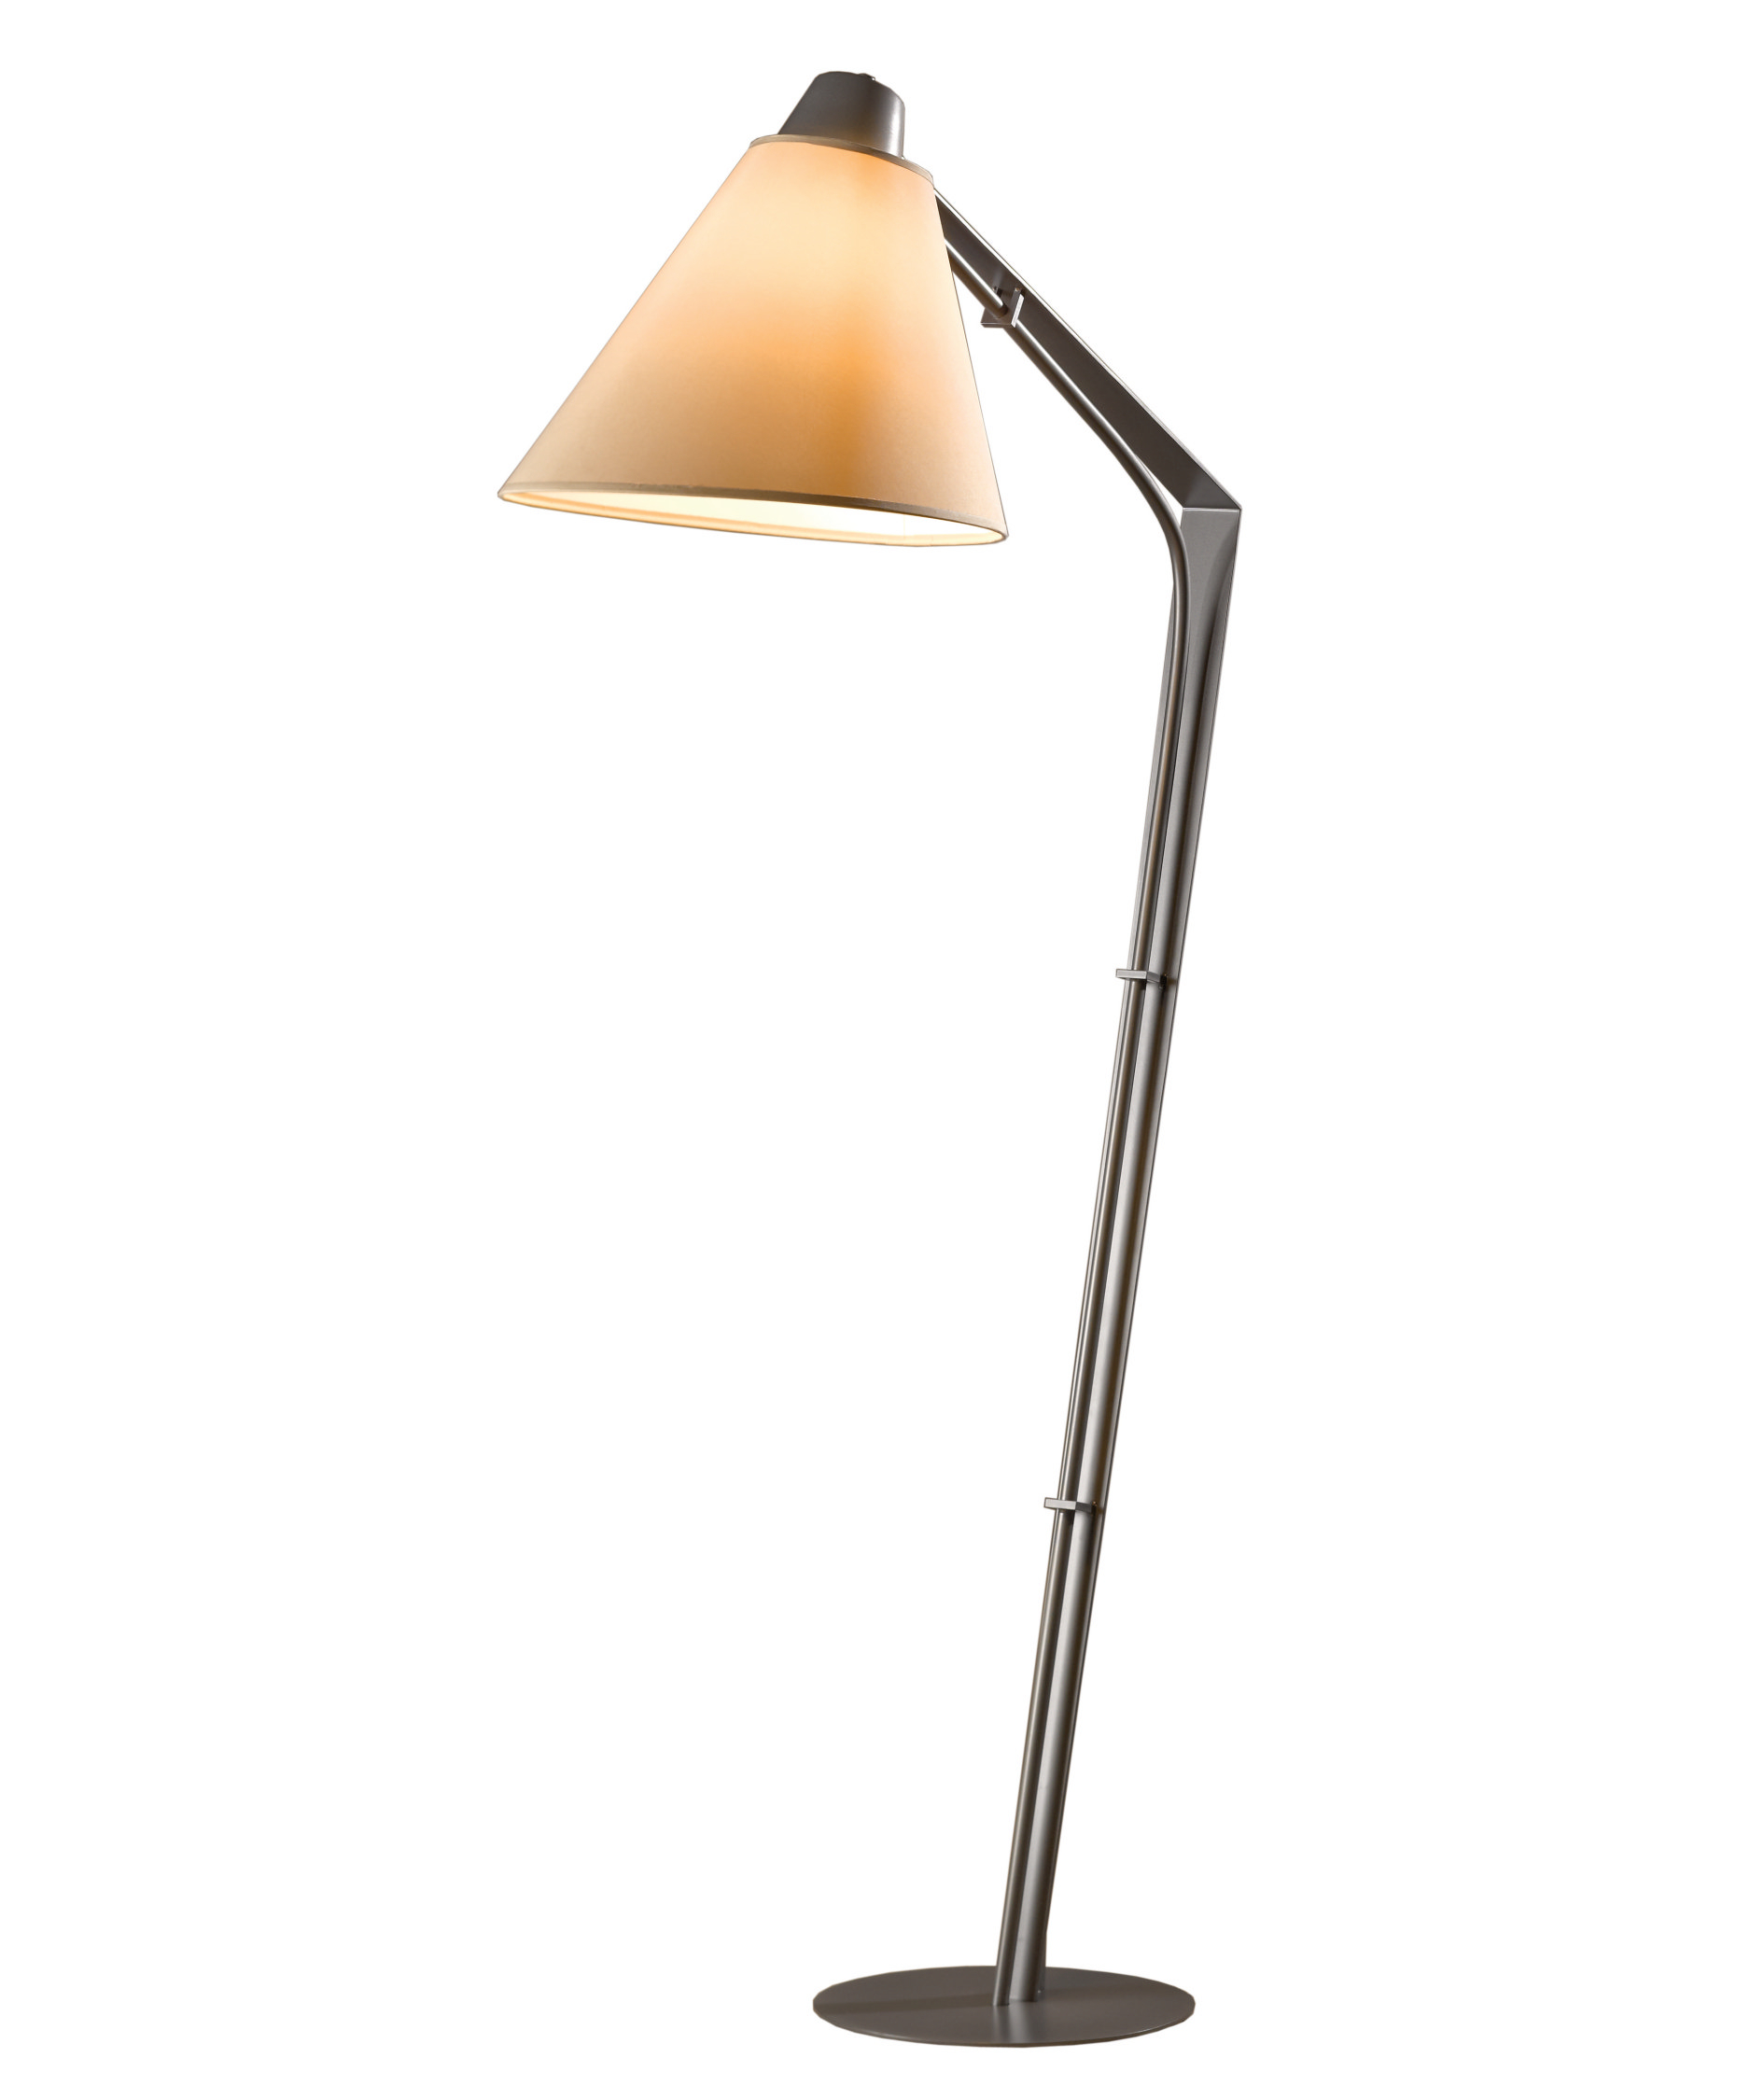 Best Floor Lamps For Reading Lighting And Ceiling Fans Three pertaining to measurements 1875 X 2250